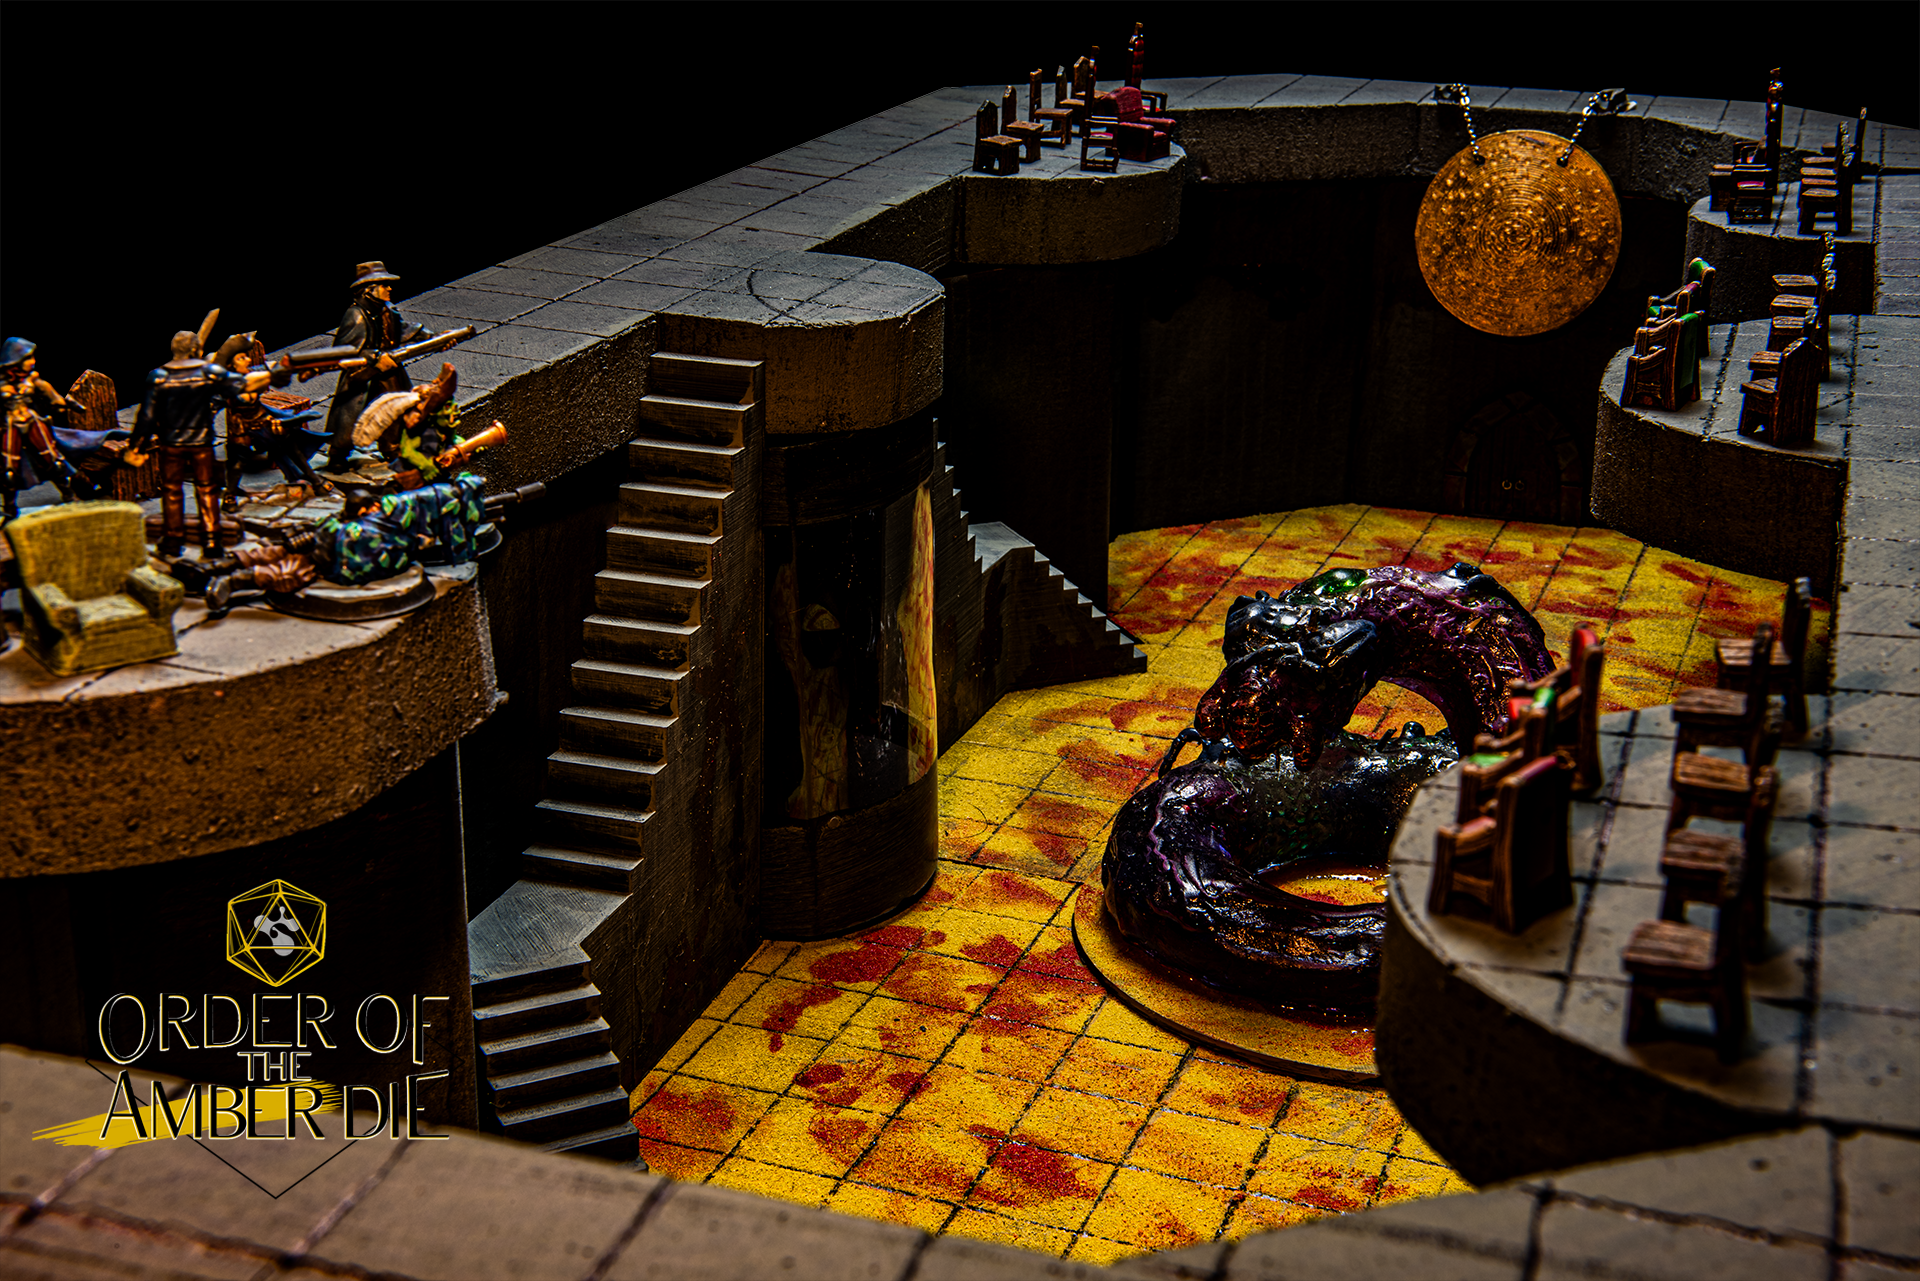 A close up view of mini figures in a dungeon standing on a ledge overlooking a monster mini